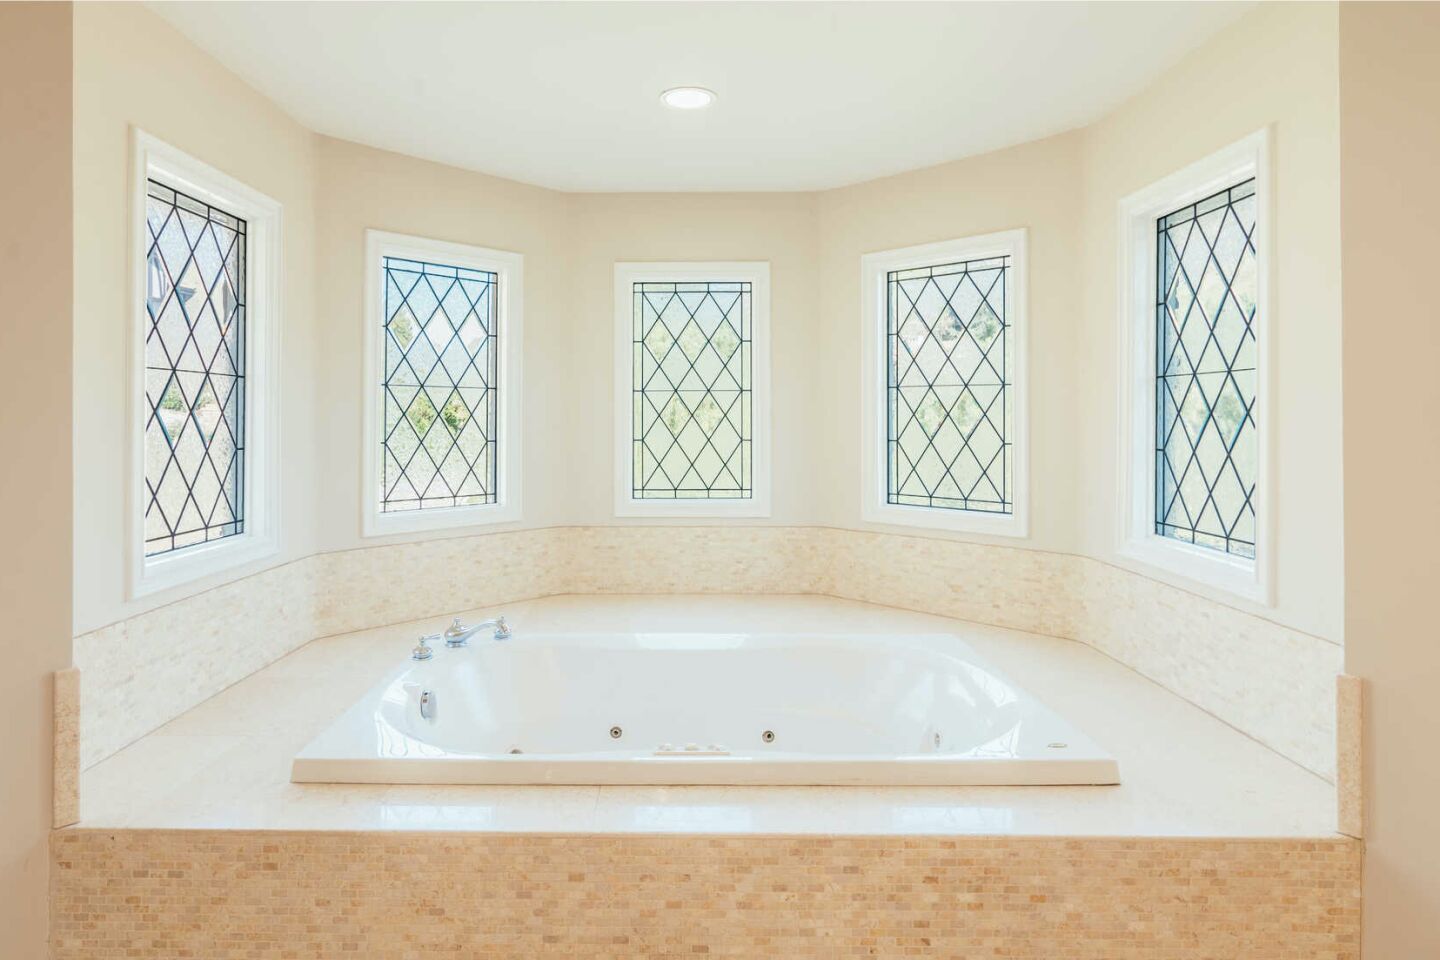 Mullioned windows in an alcove holding a spa tub.